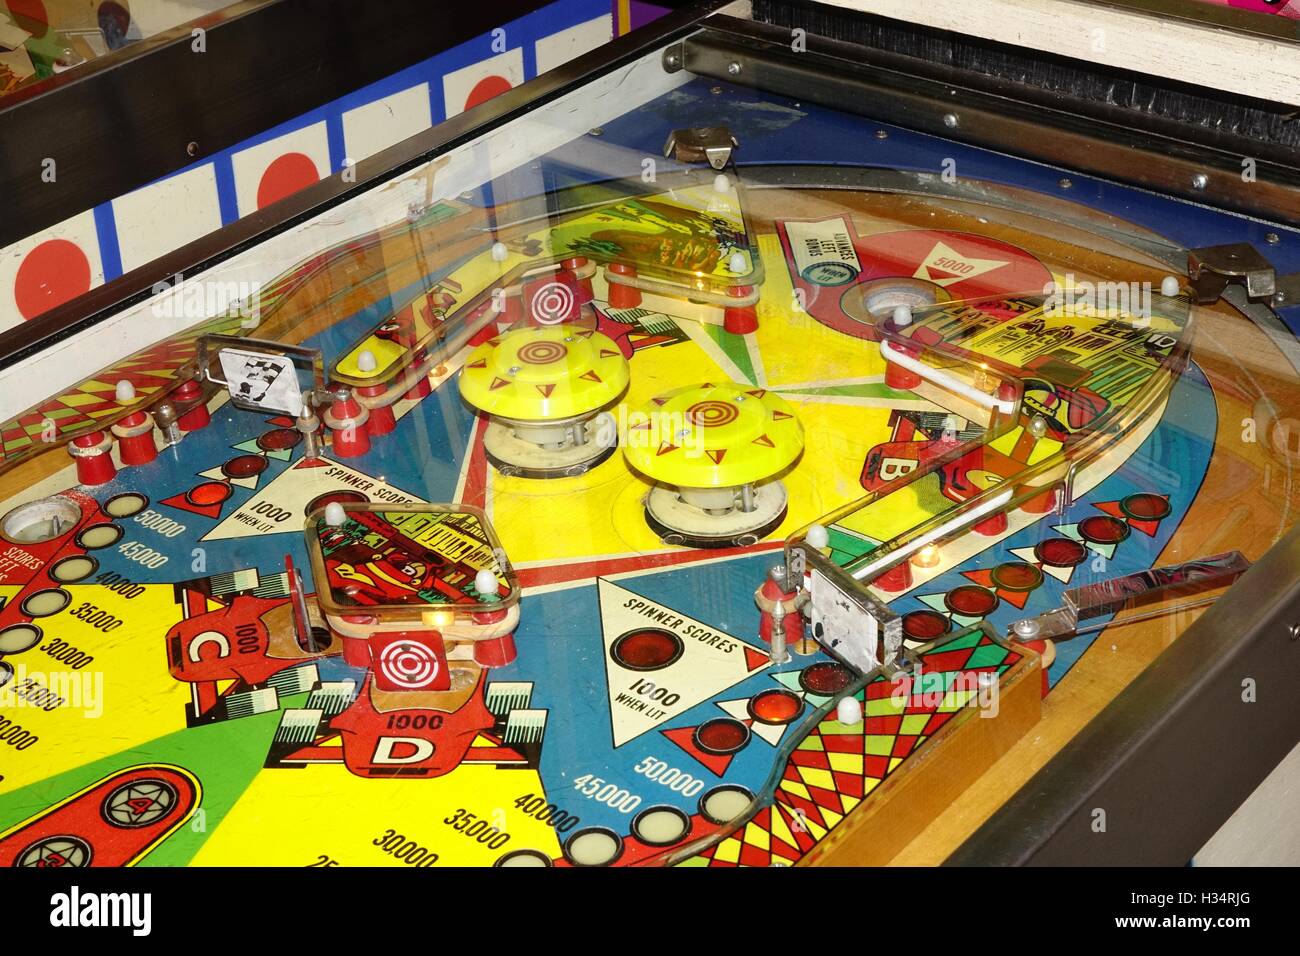 Playfield of a pinball machine showing bumpers, gates, cushions, targets and other features, Pinball Museum, Center in the Squar Stock Photo